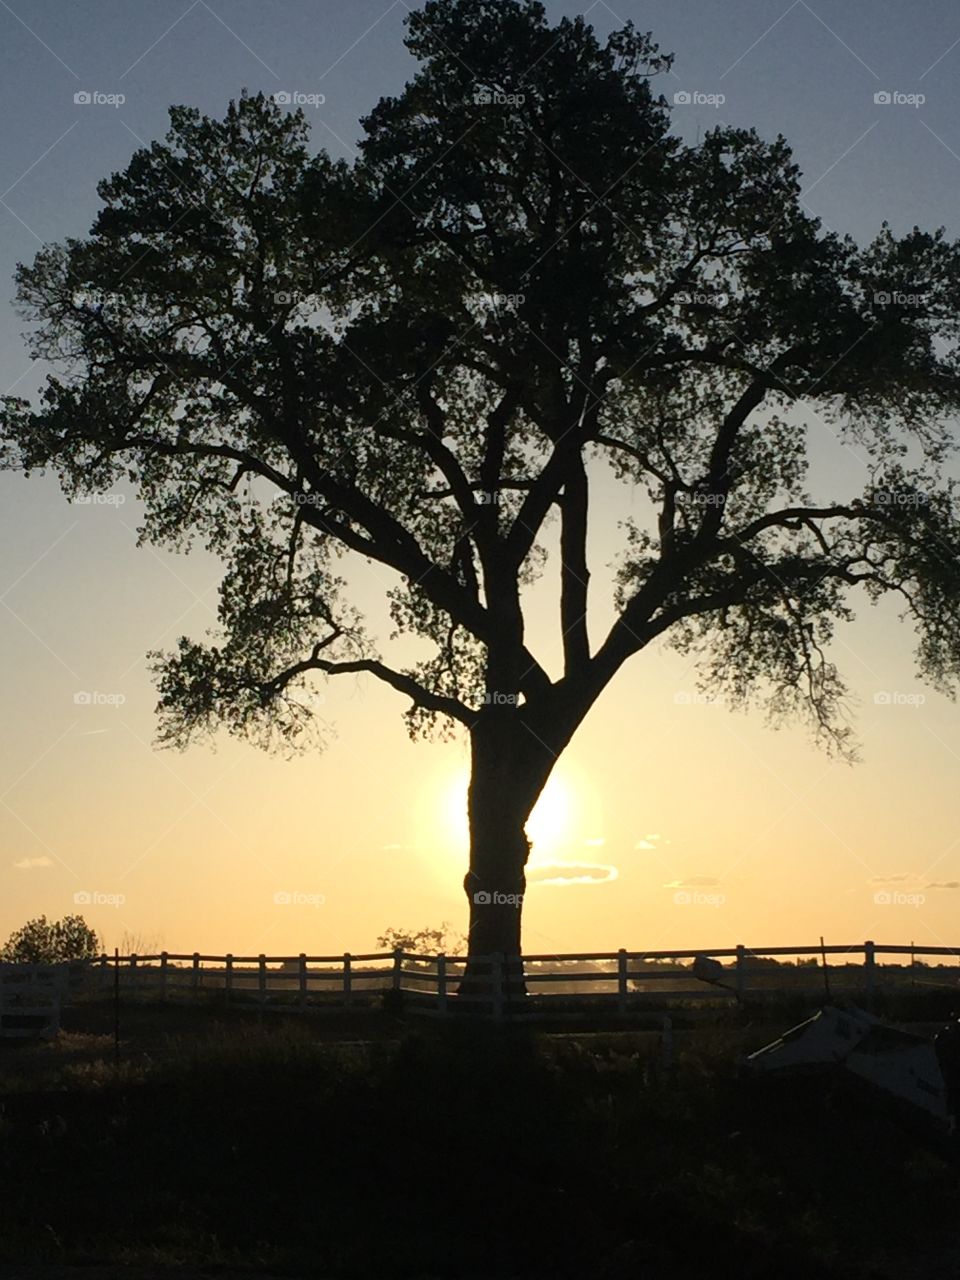 The sun setting ablaze behind this ancient cottonwood tree 